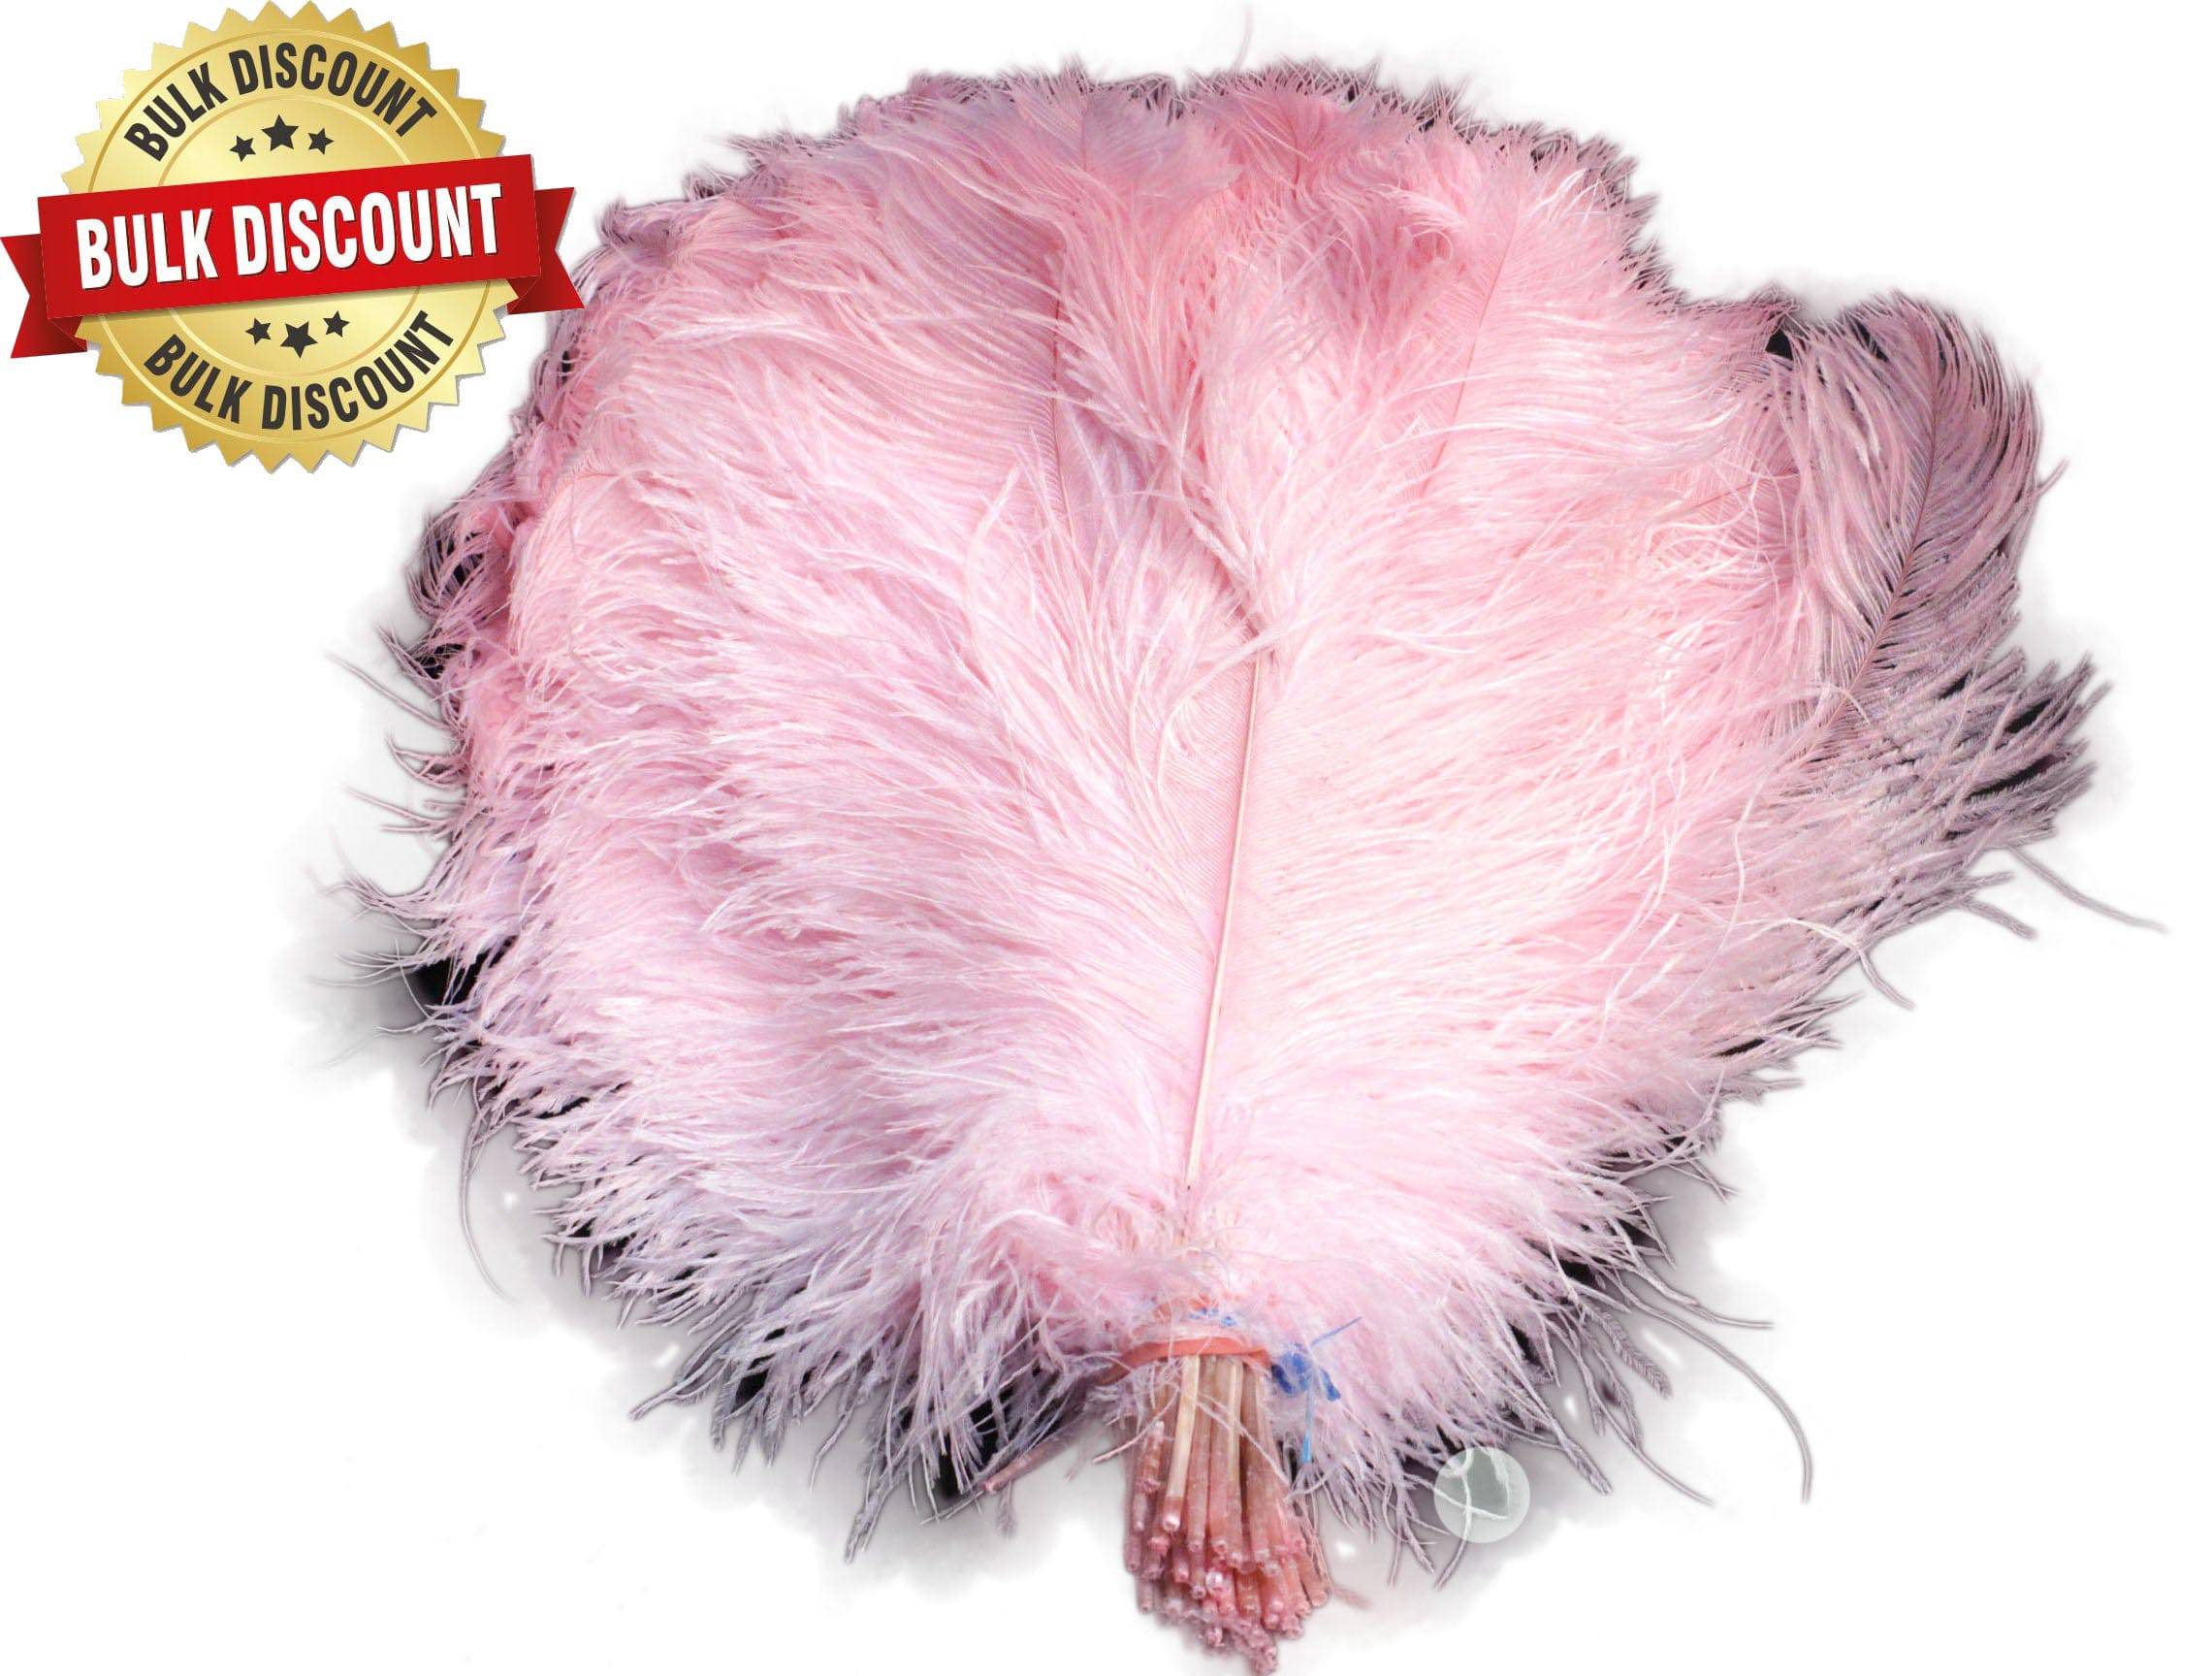 1/2 lb. - 18-24 Baby Pink Large Ostrich Wing Plume Wholesale Feathers (Bulk)